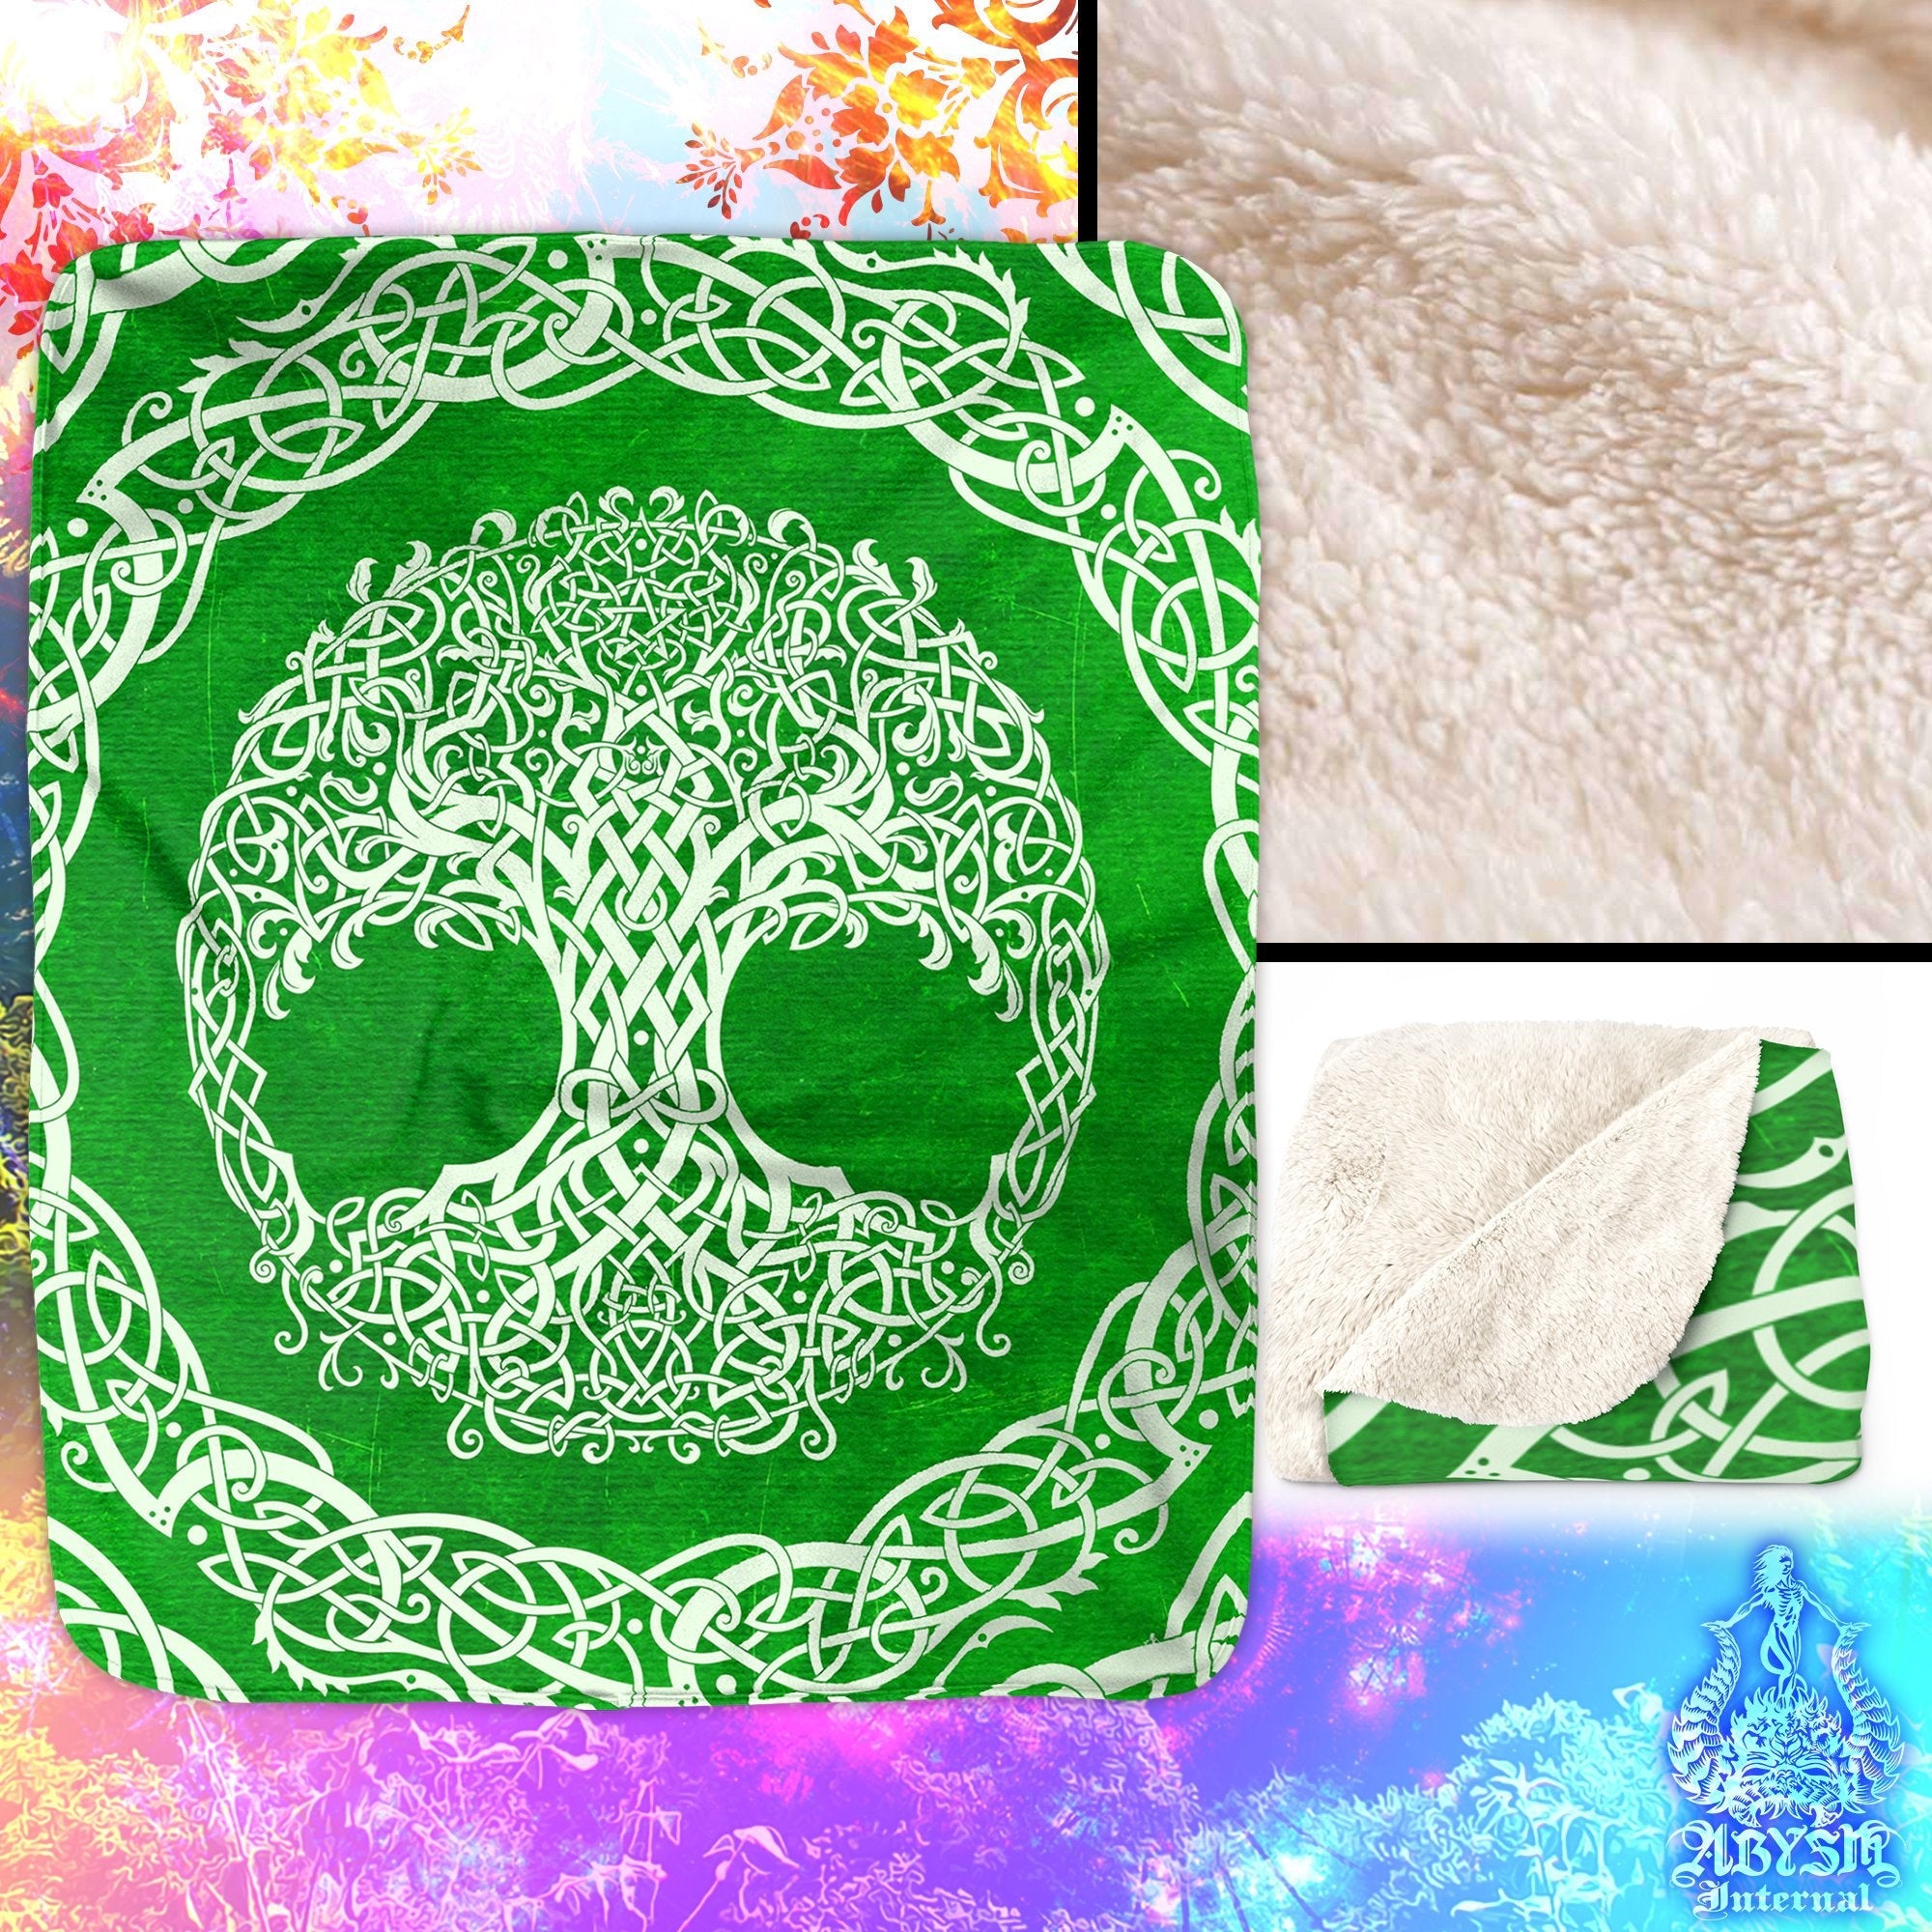 Tree of Life Throw Fleece Blanket, Pagan Decor, Celtic Knot, Witchy Room, Wicca - Green & White - Abysm Internal